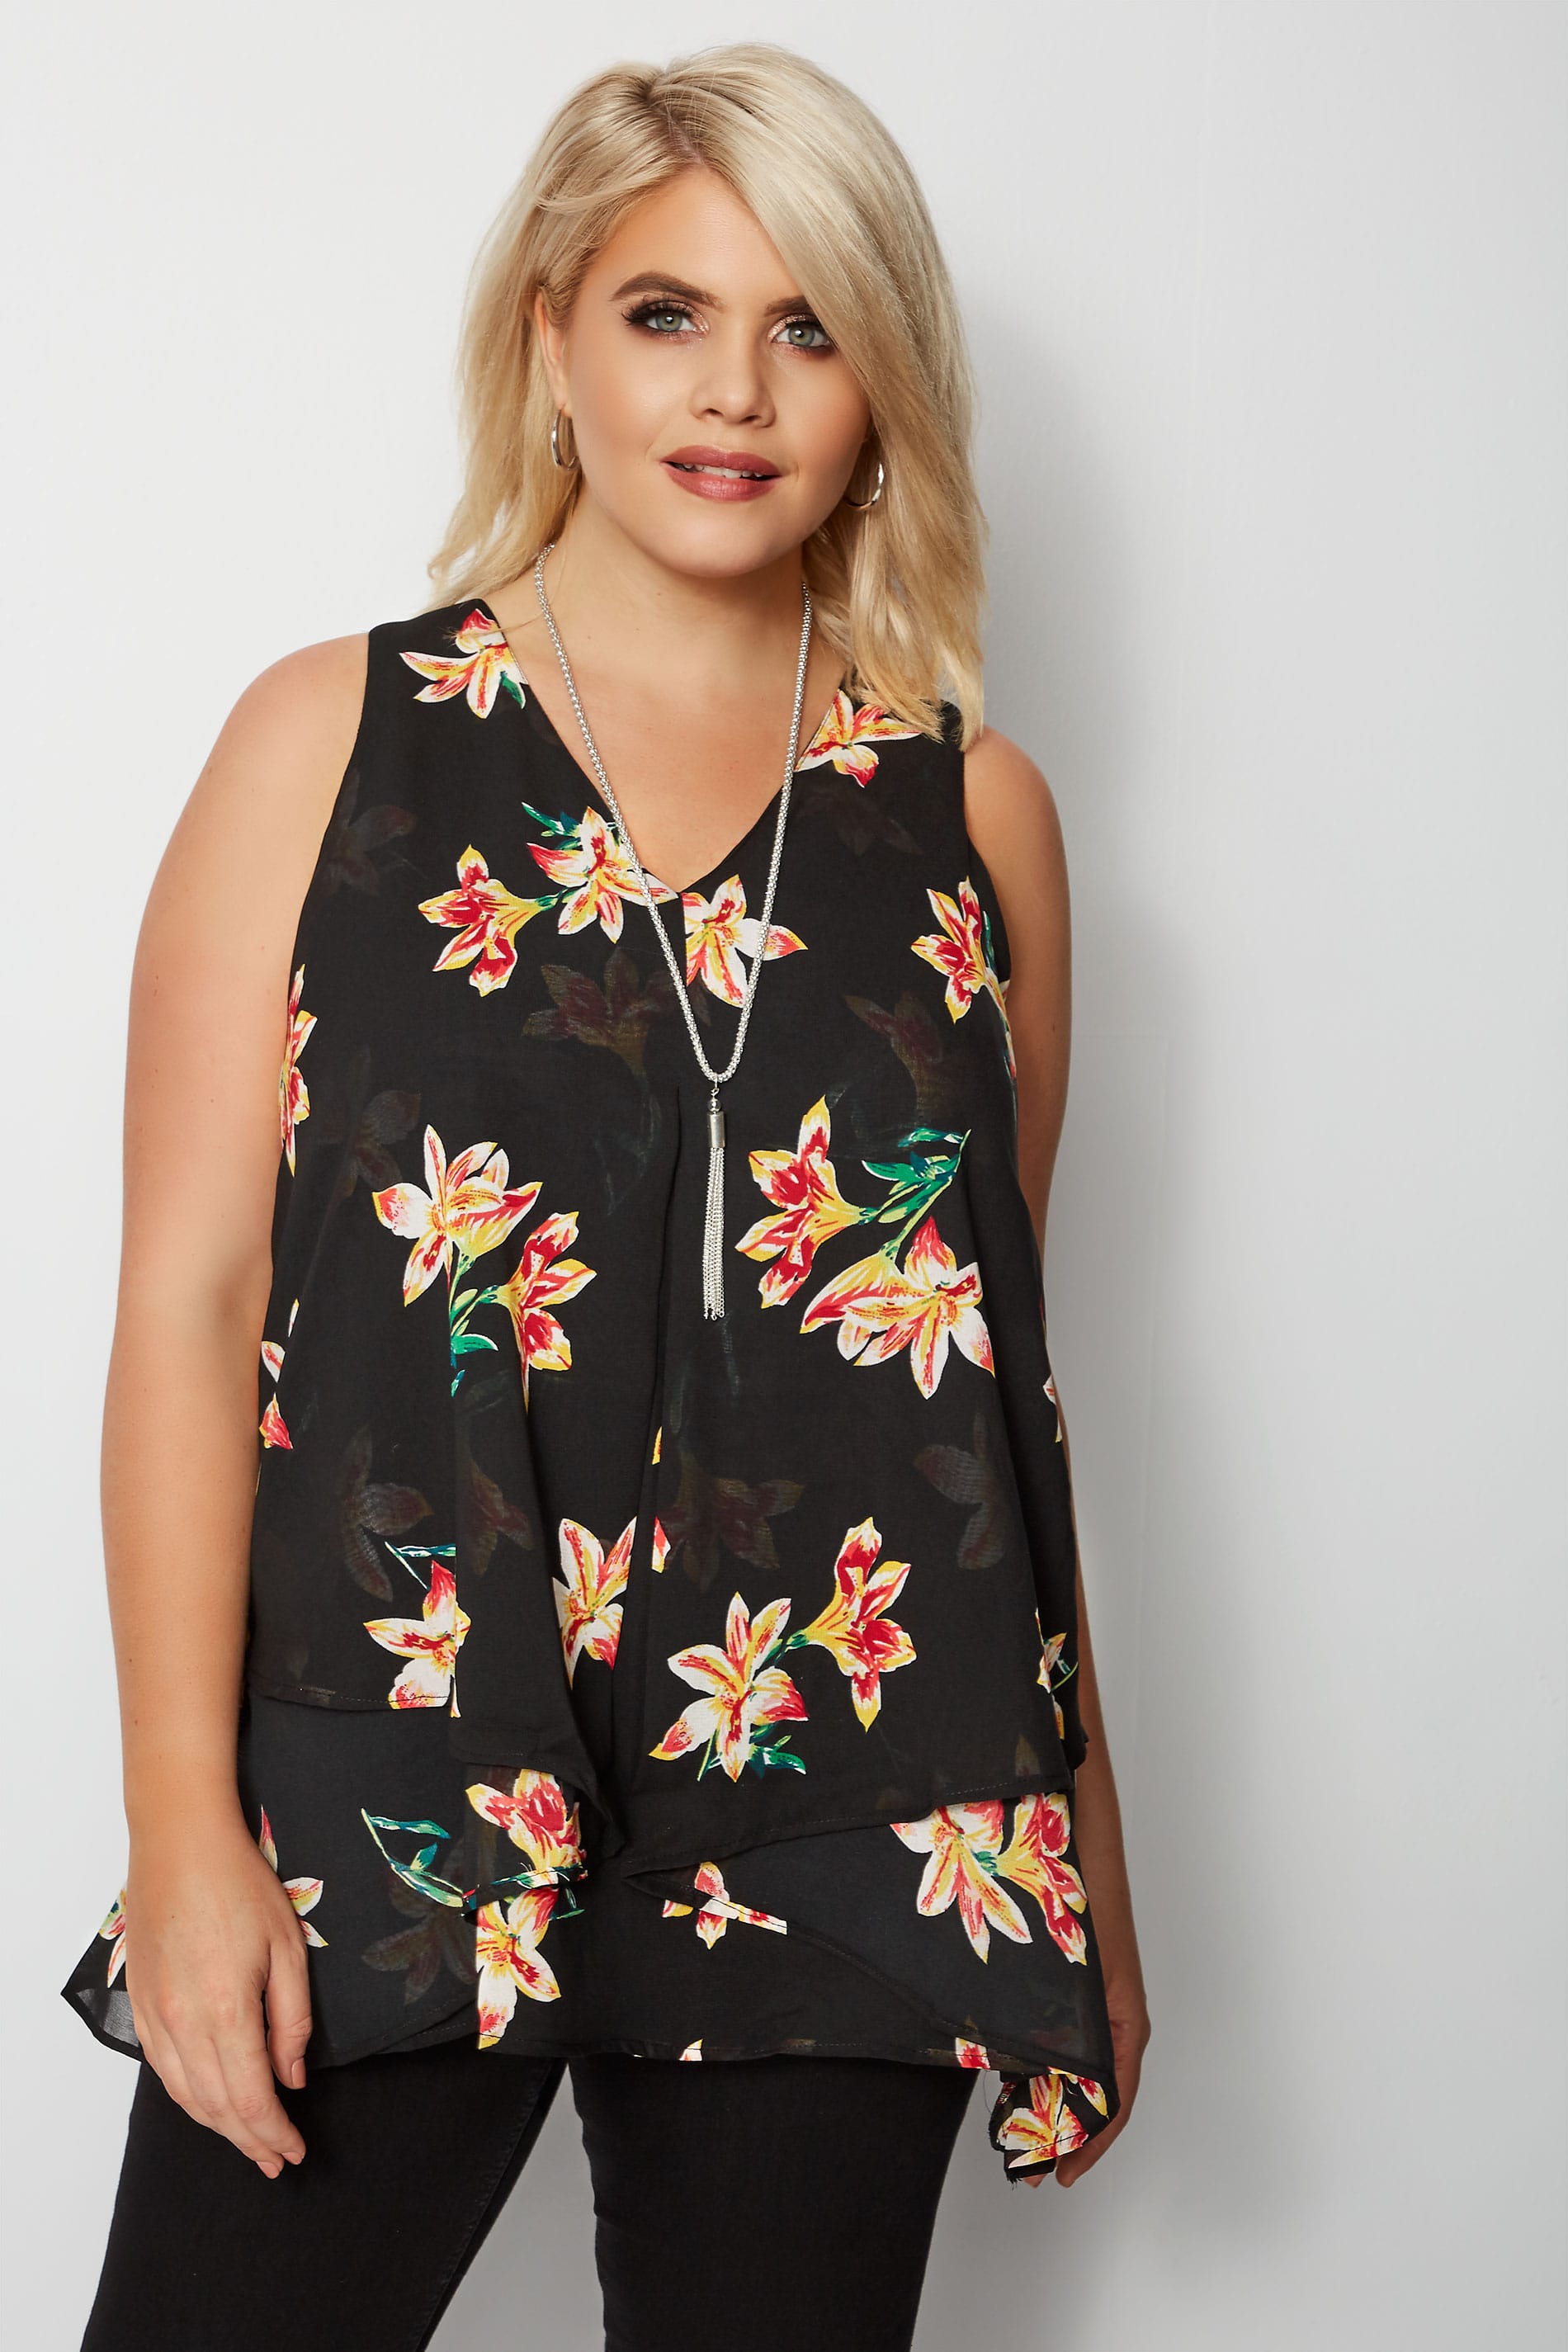 YOURS LONDON Black & Yellow Floral Layered Chiffon Top, Plus size 16 to 32